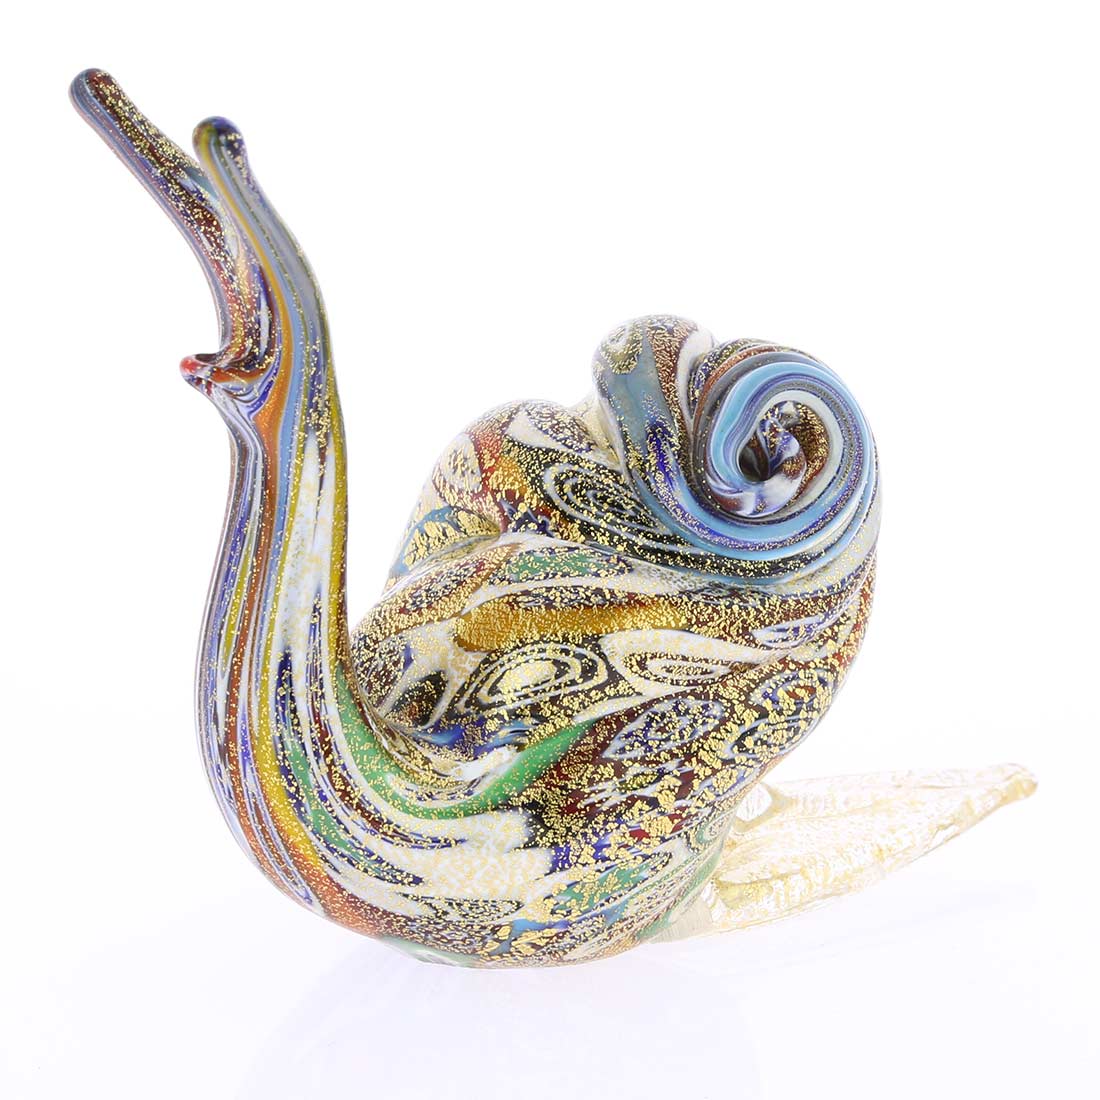 Snail Figurine of Hand Blown Glass with 24K Gold 